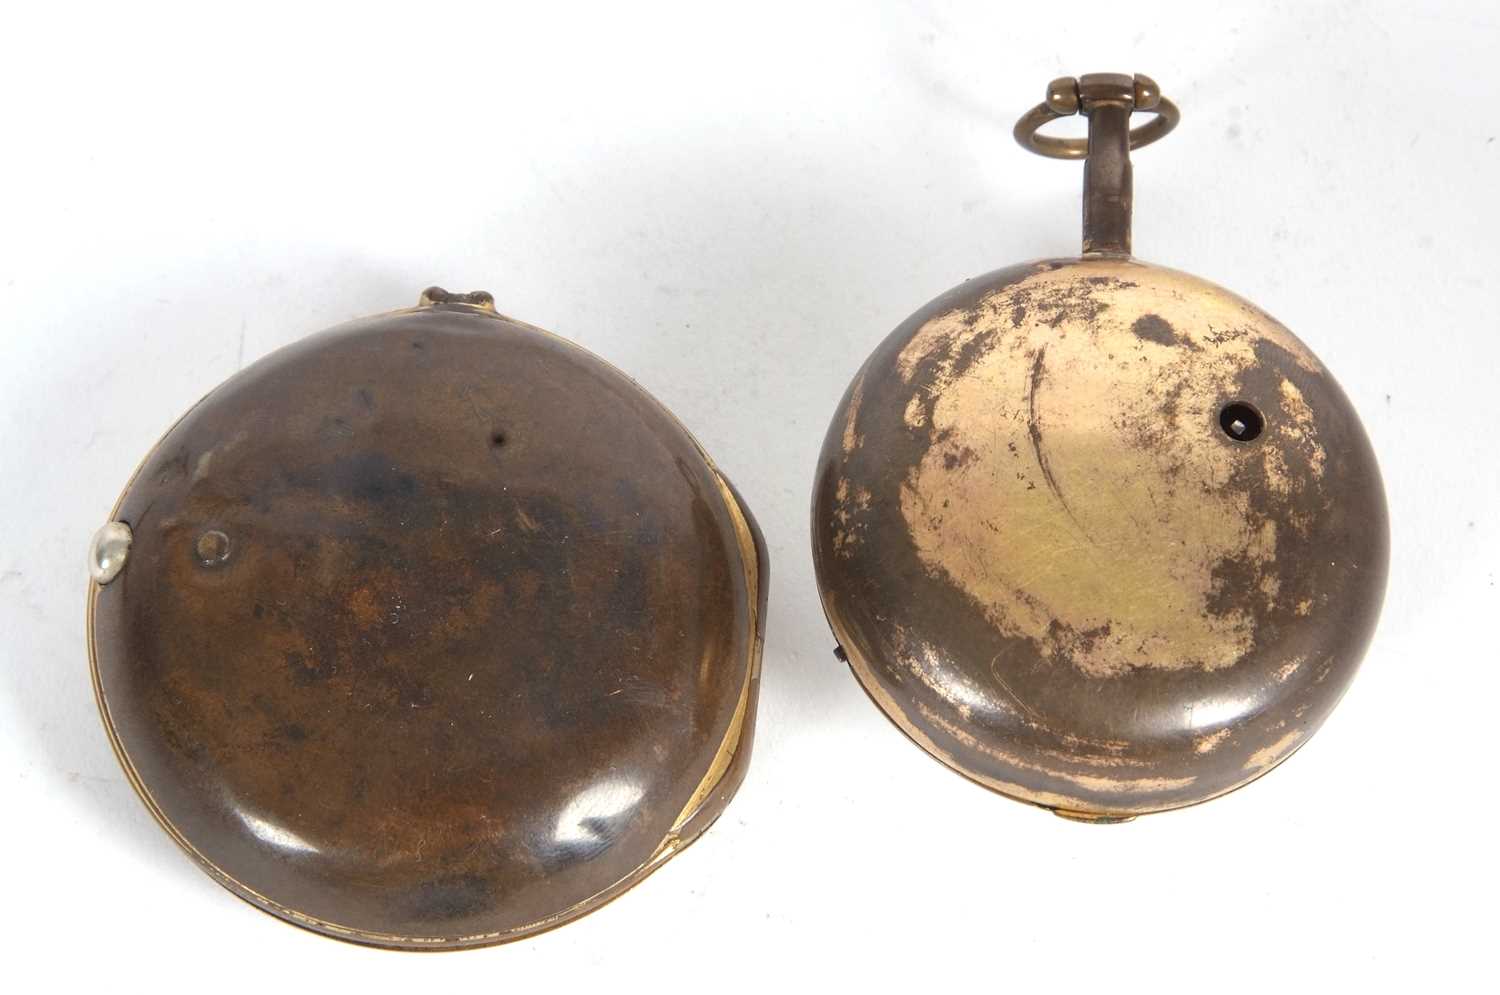 A Hart of Chichester fusee pocket watch with pair case, the watch has a key wound movement and - Image 3 of 3